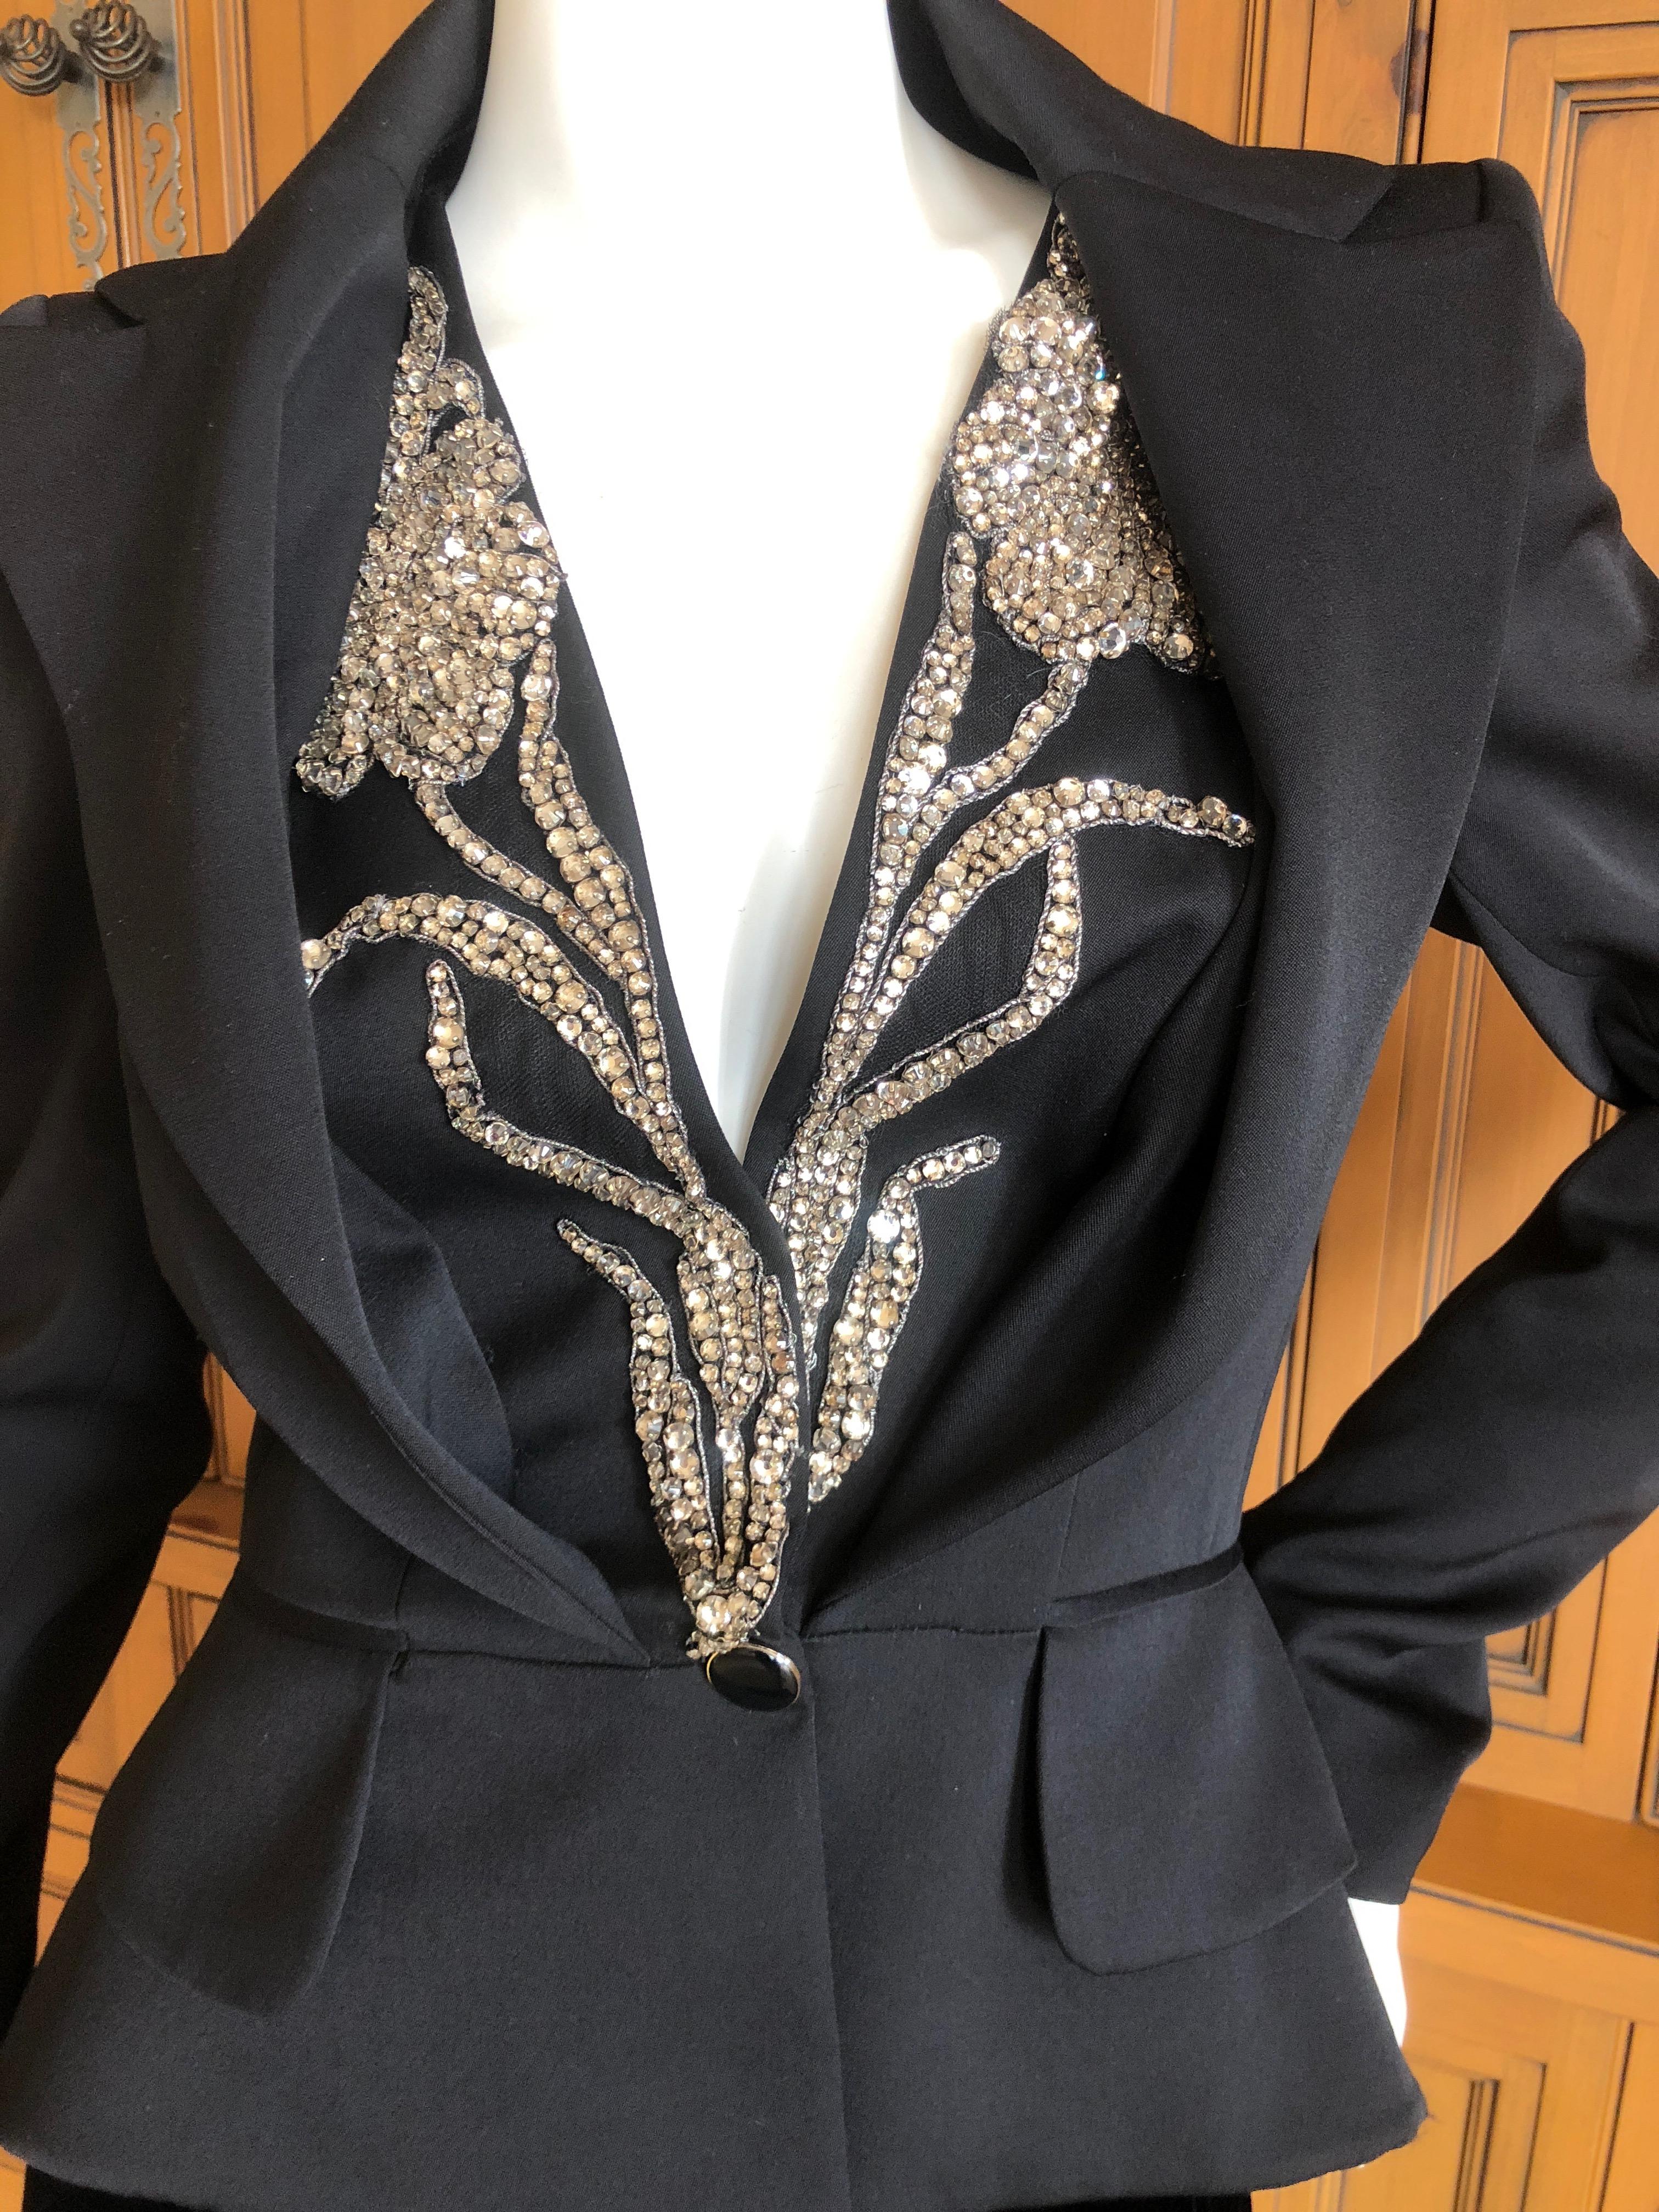 Alexander McQueen Black Tailored Tailcoat with Crystal Embellished Floral Lapels For Sale 1